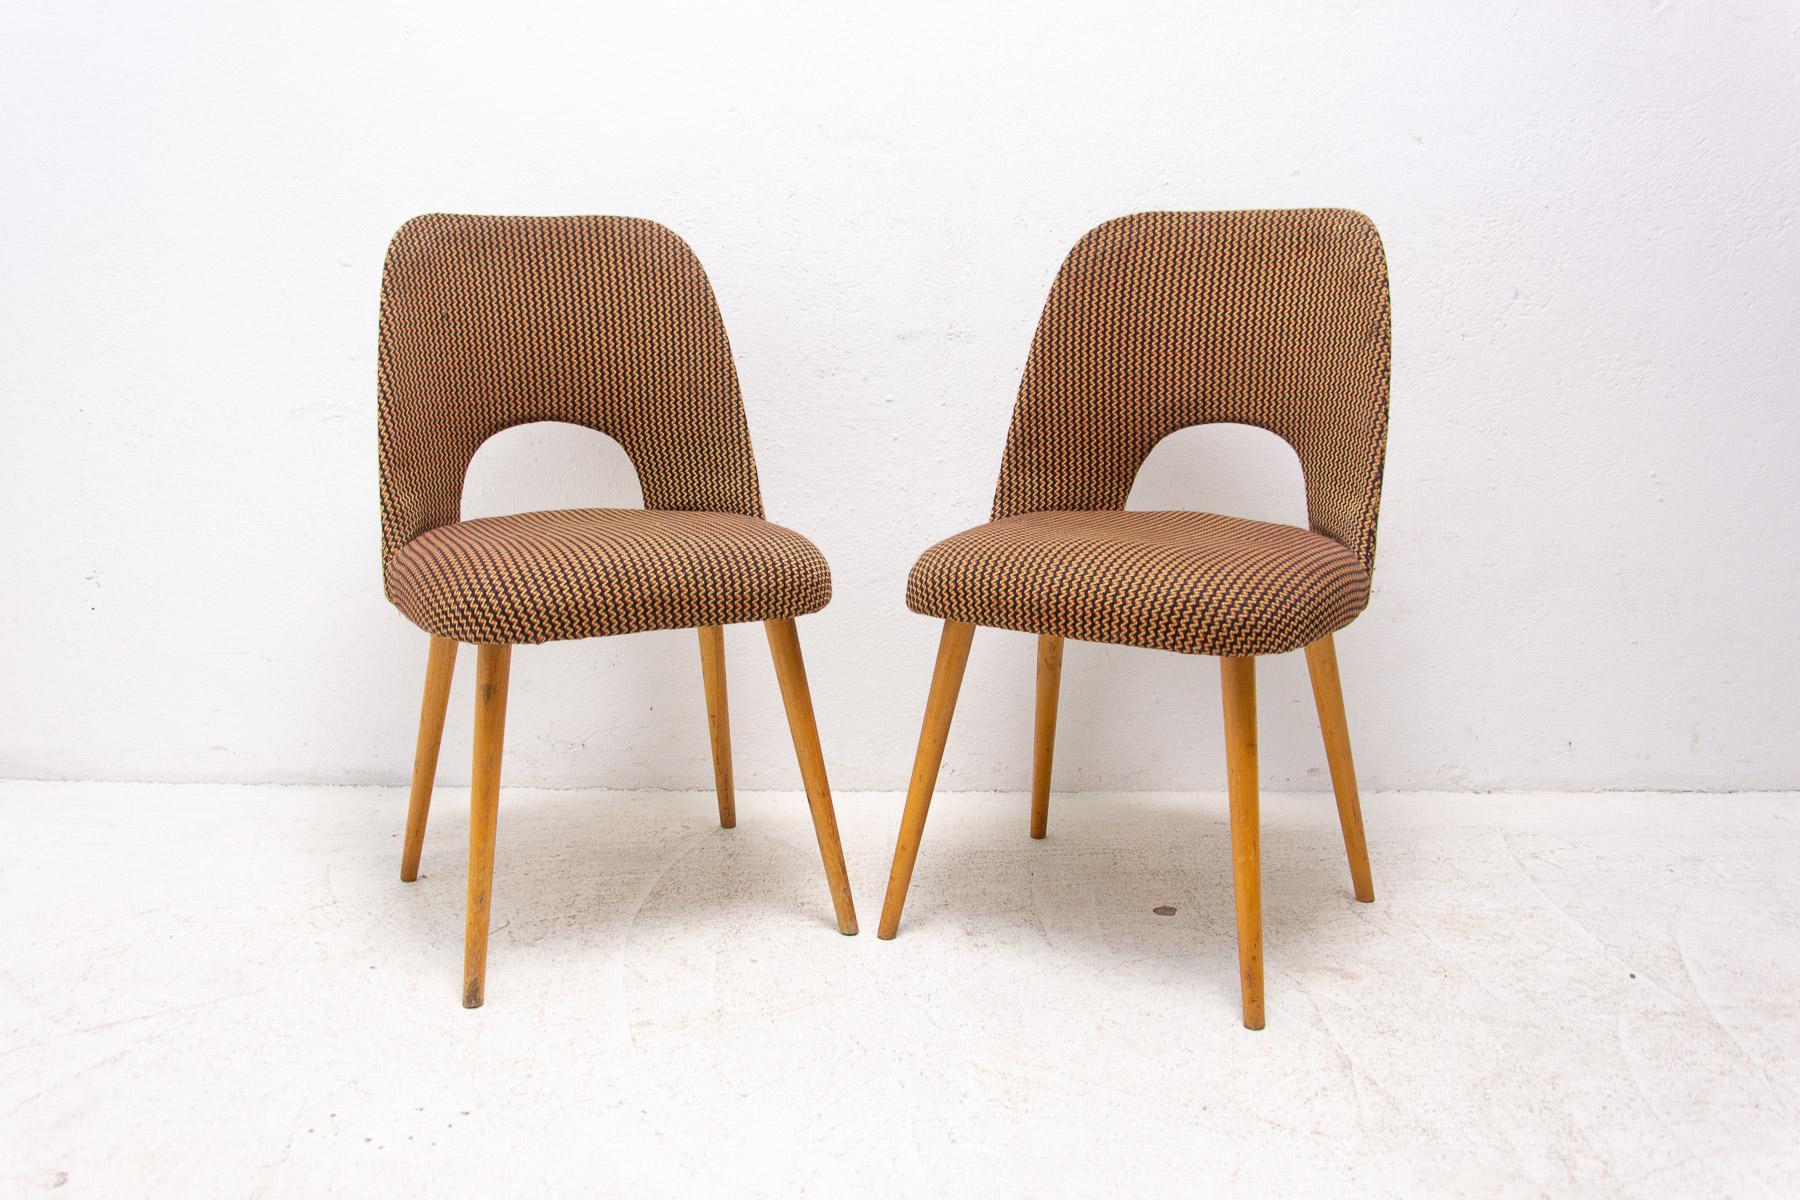 An interesting model of mid century upholstered bentwood dining chairs designed by Radomír Hofman for TON Bystrice pod Hostýnem (Thonet successor in Czechoslovakia after World War 2) .

They were made in the former Czechoslovakia in the 1960´s.